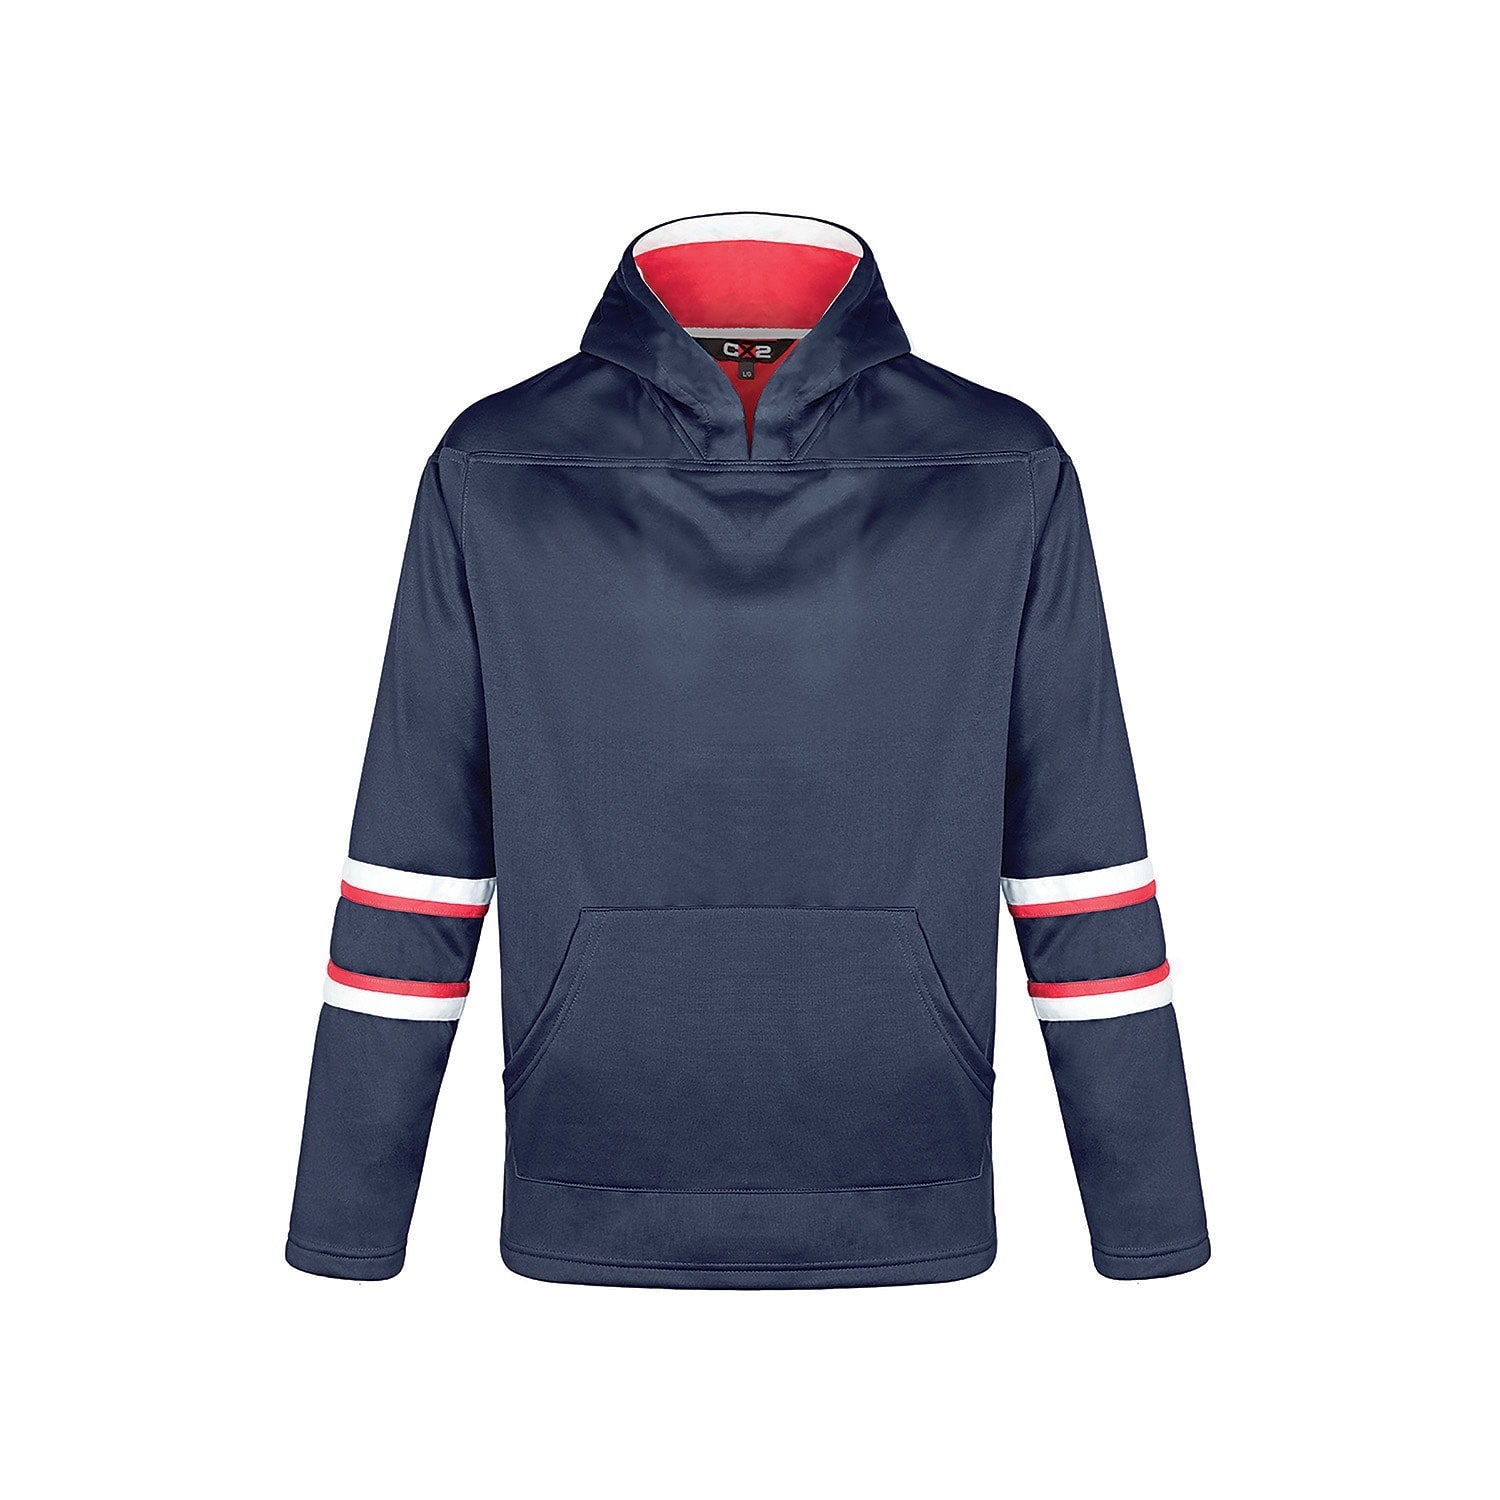 L0617Y - Dangle Youth Fleece Hockey Hoodie Navy/Red/White